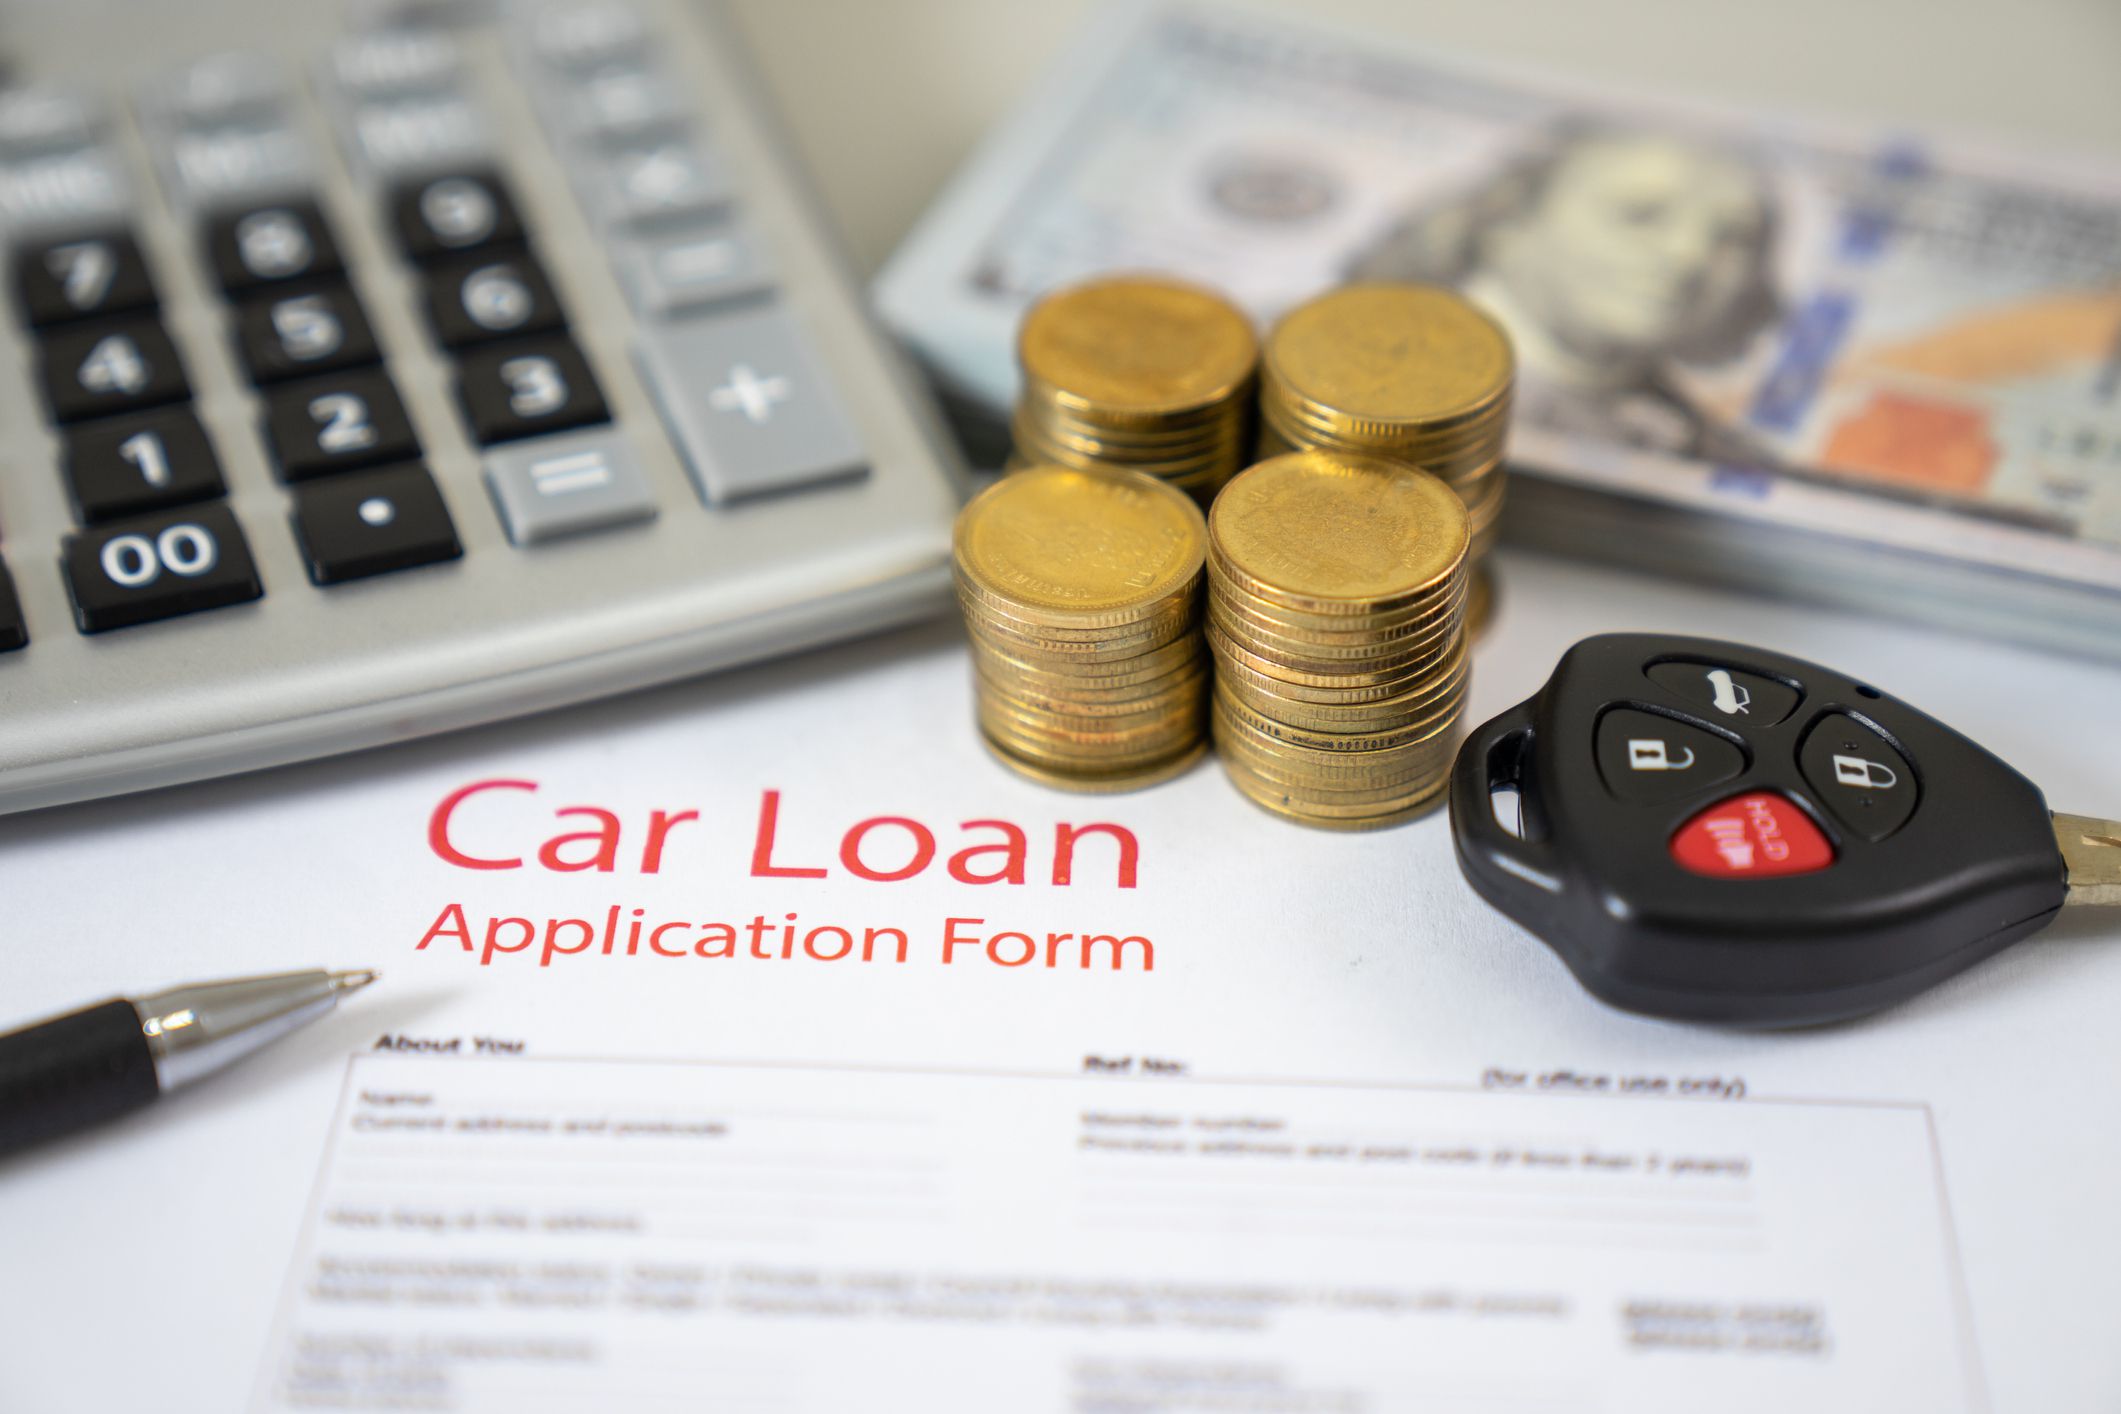 6 Ways to Cut the Cost of your Car Loan